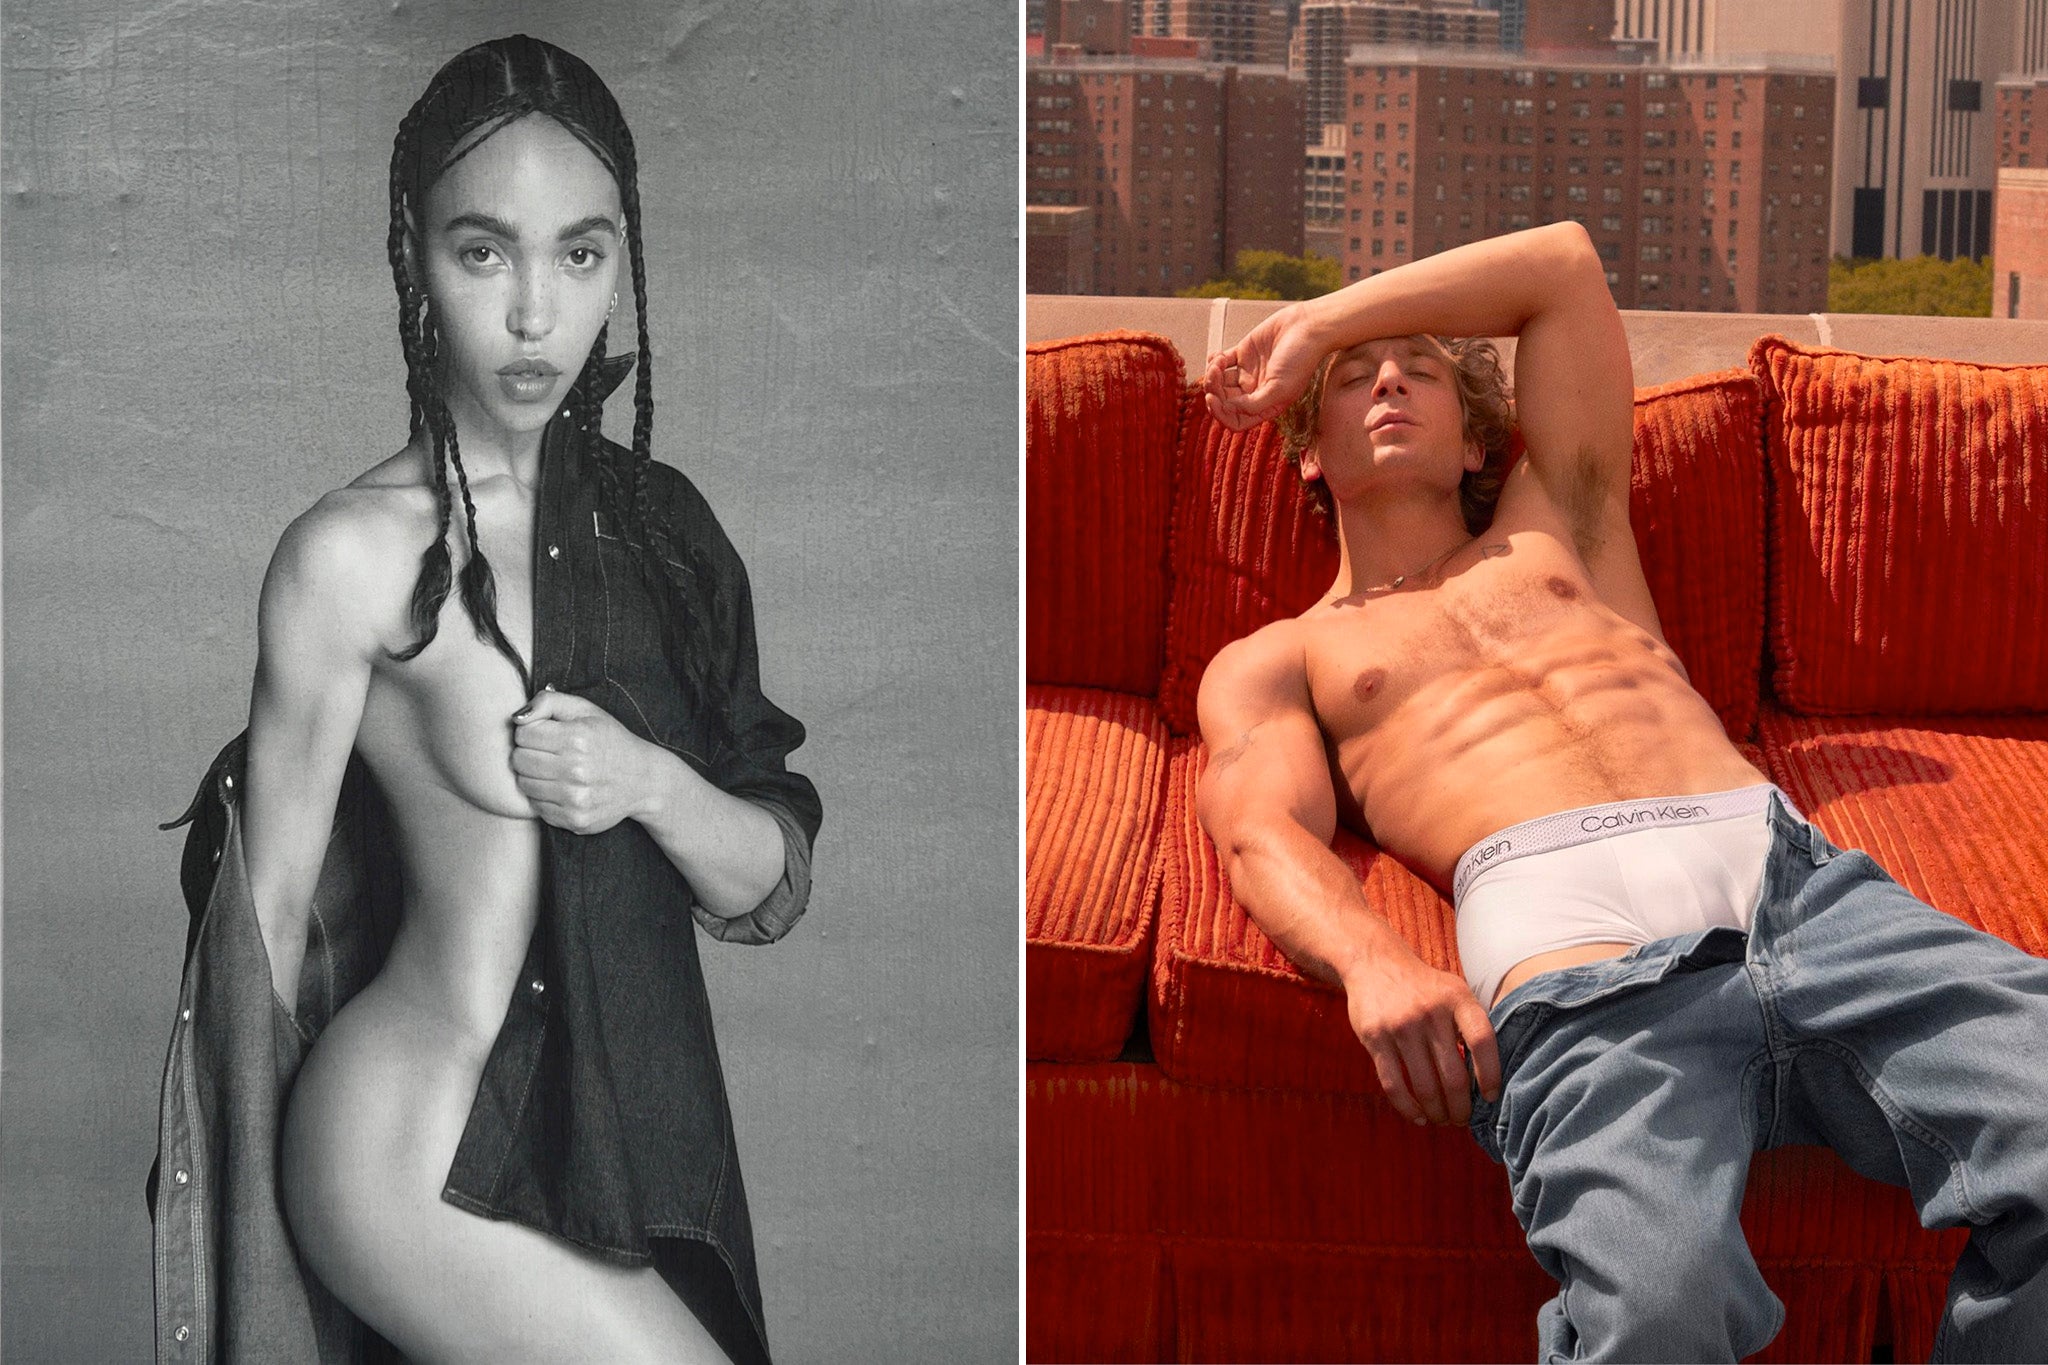 Two Calvin Klein adverts with two very different reactions